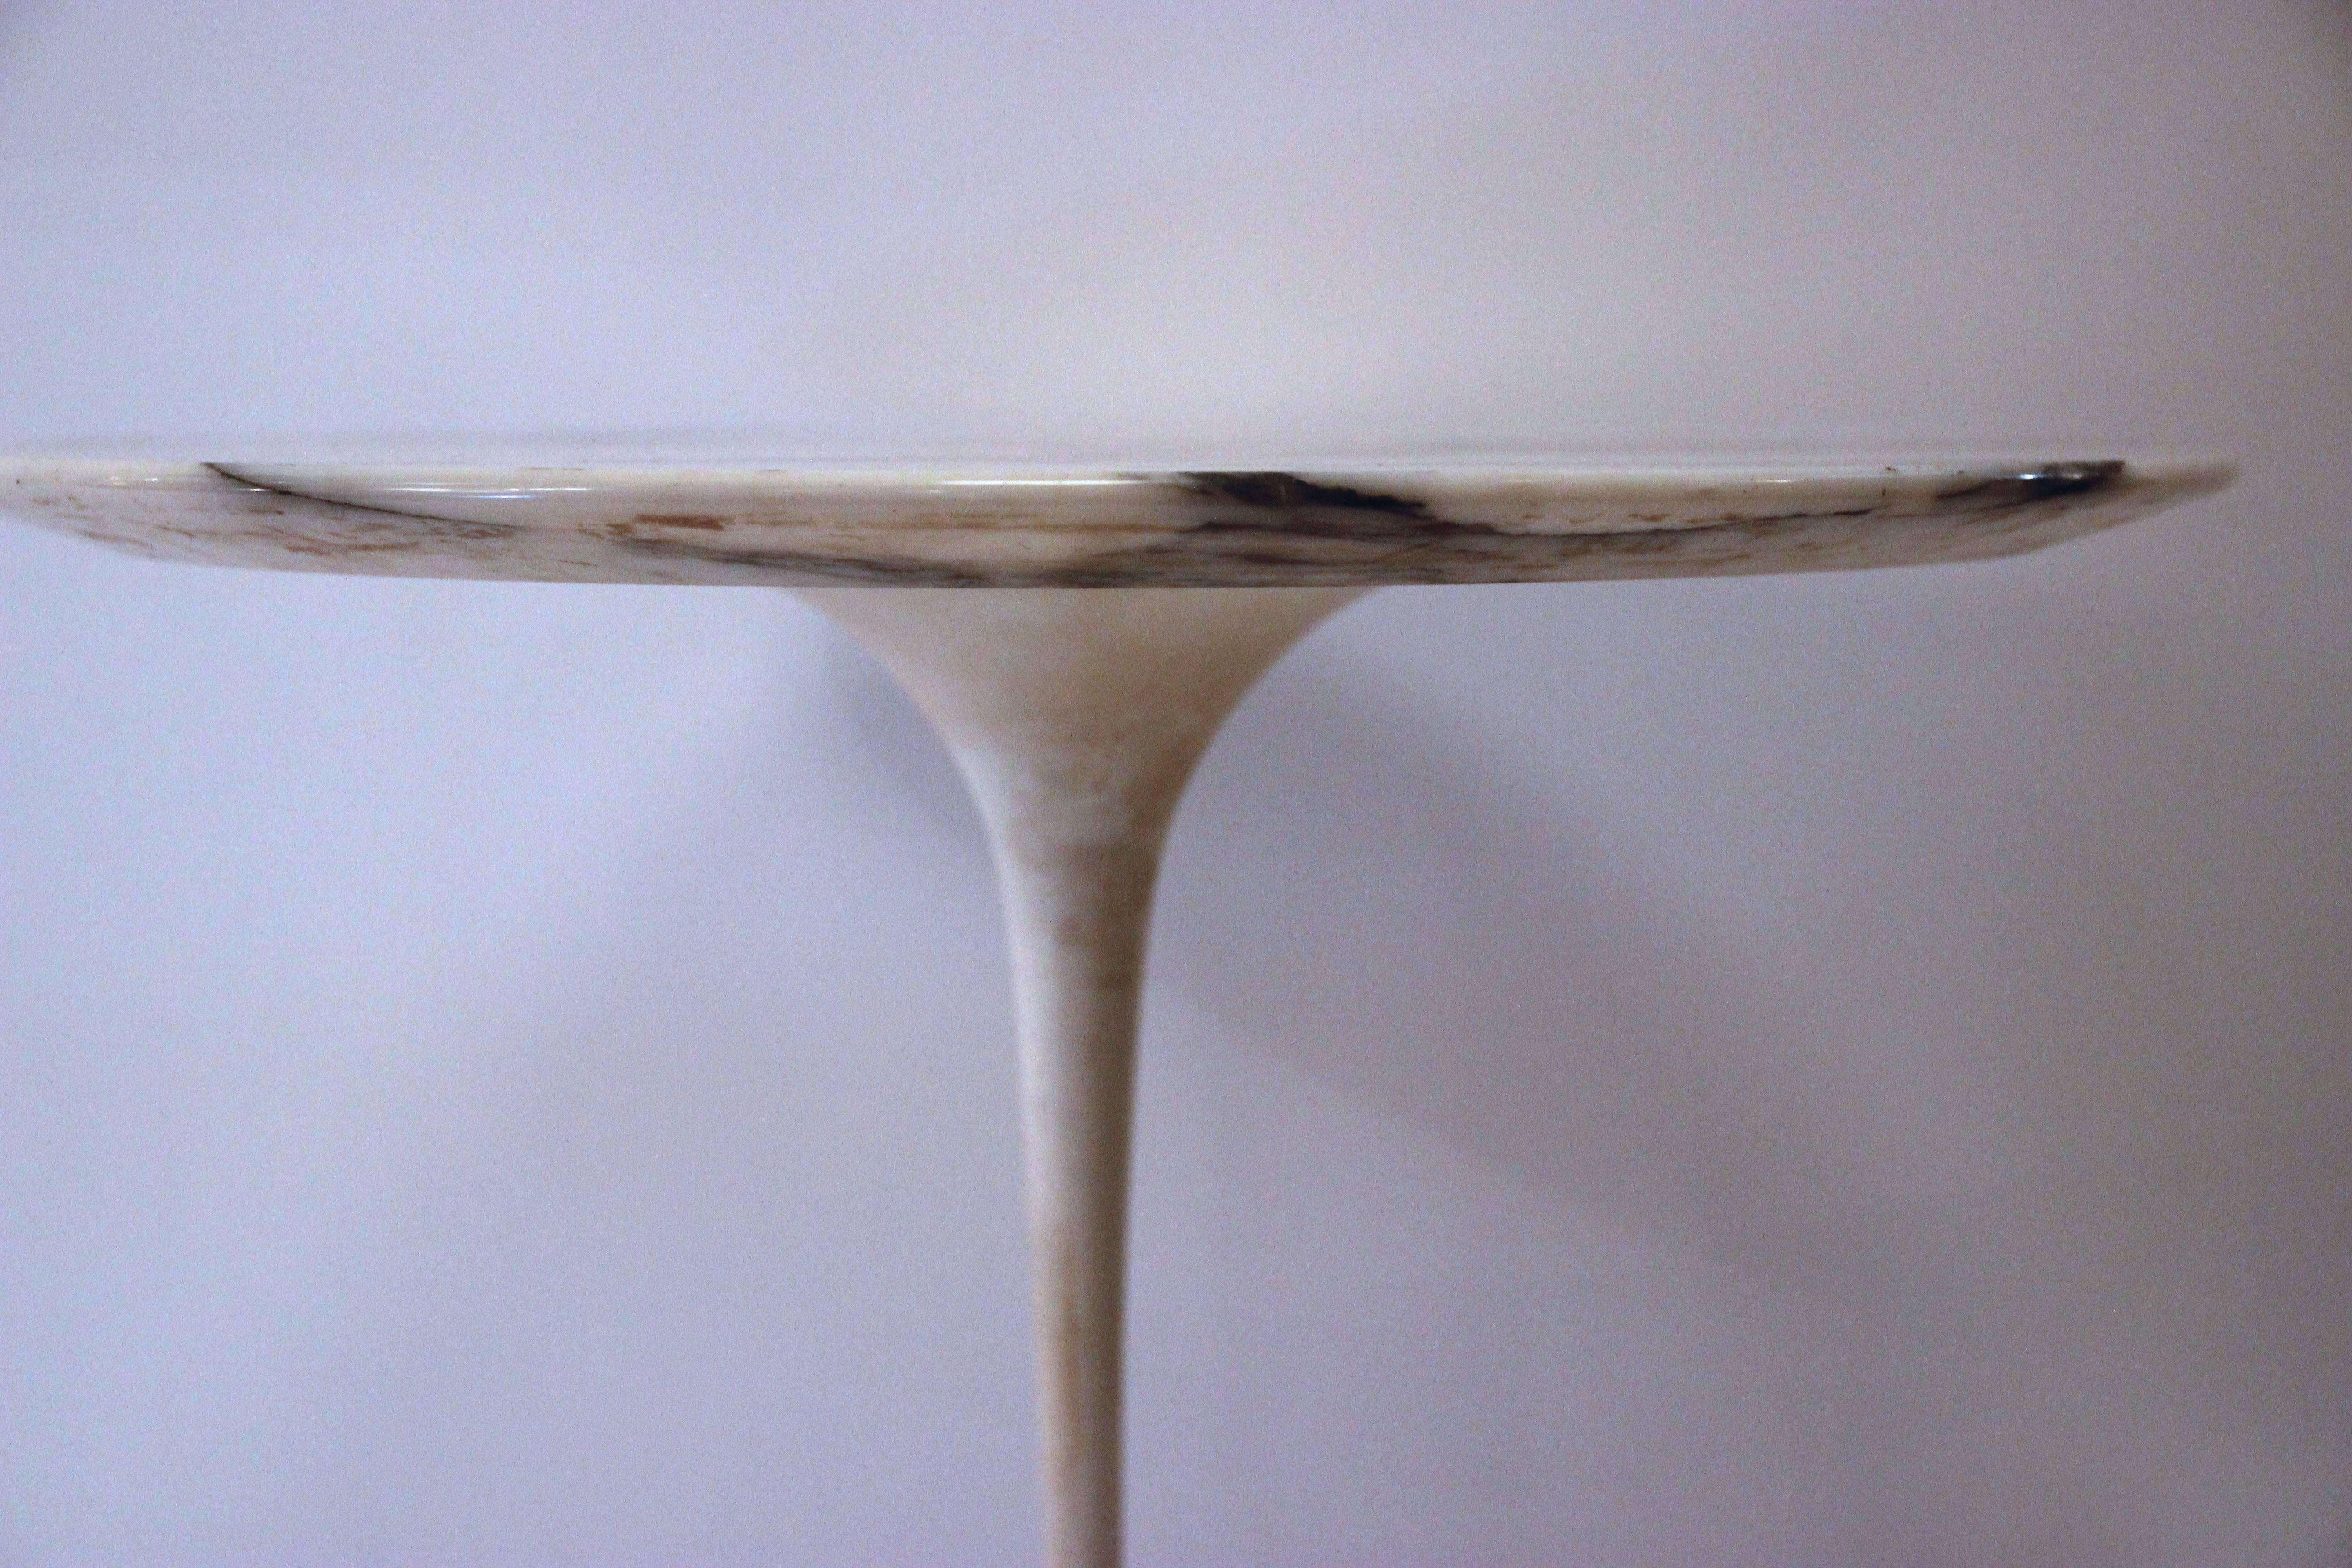 Eero Saarinen,
small table,
Knoll edition,
marble-top and base in white lacquer,
circa 1960, USA.
Measures: Height: 62 cm, diameter 60 cm.